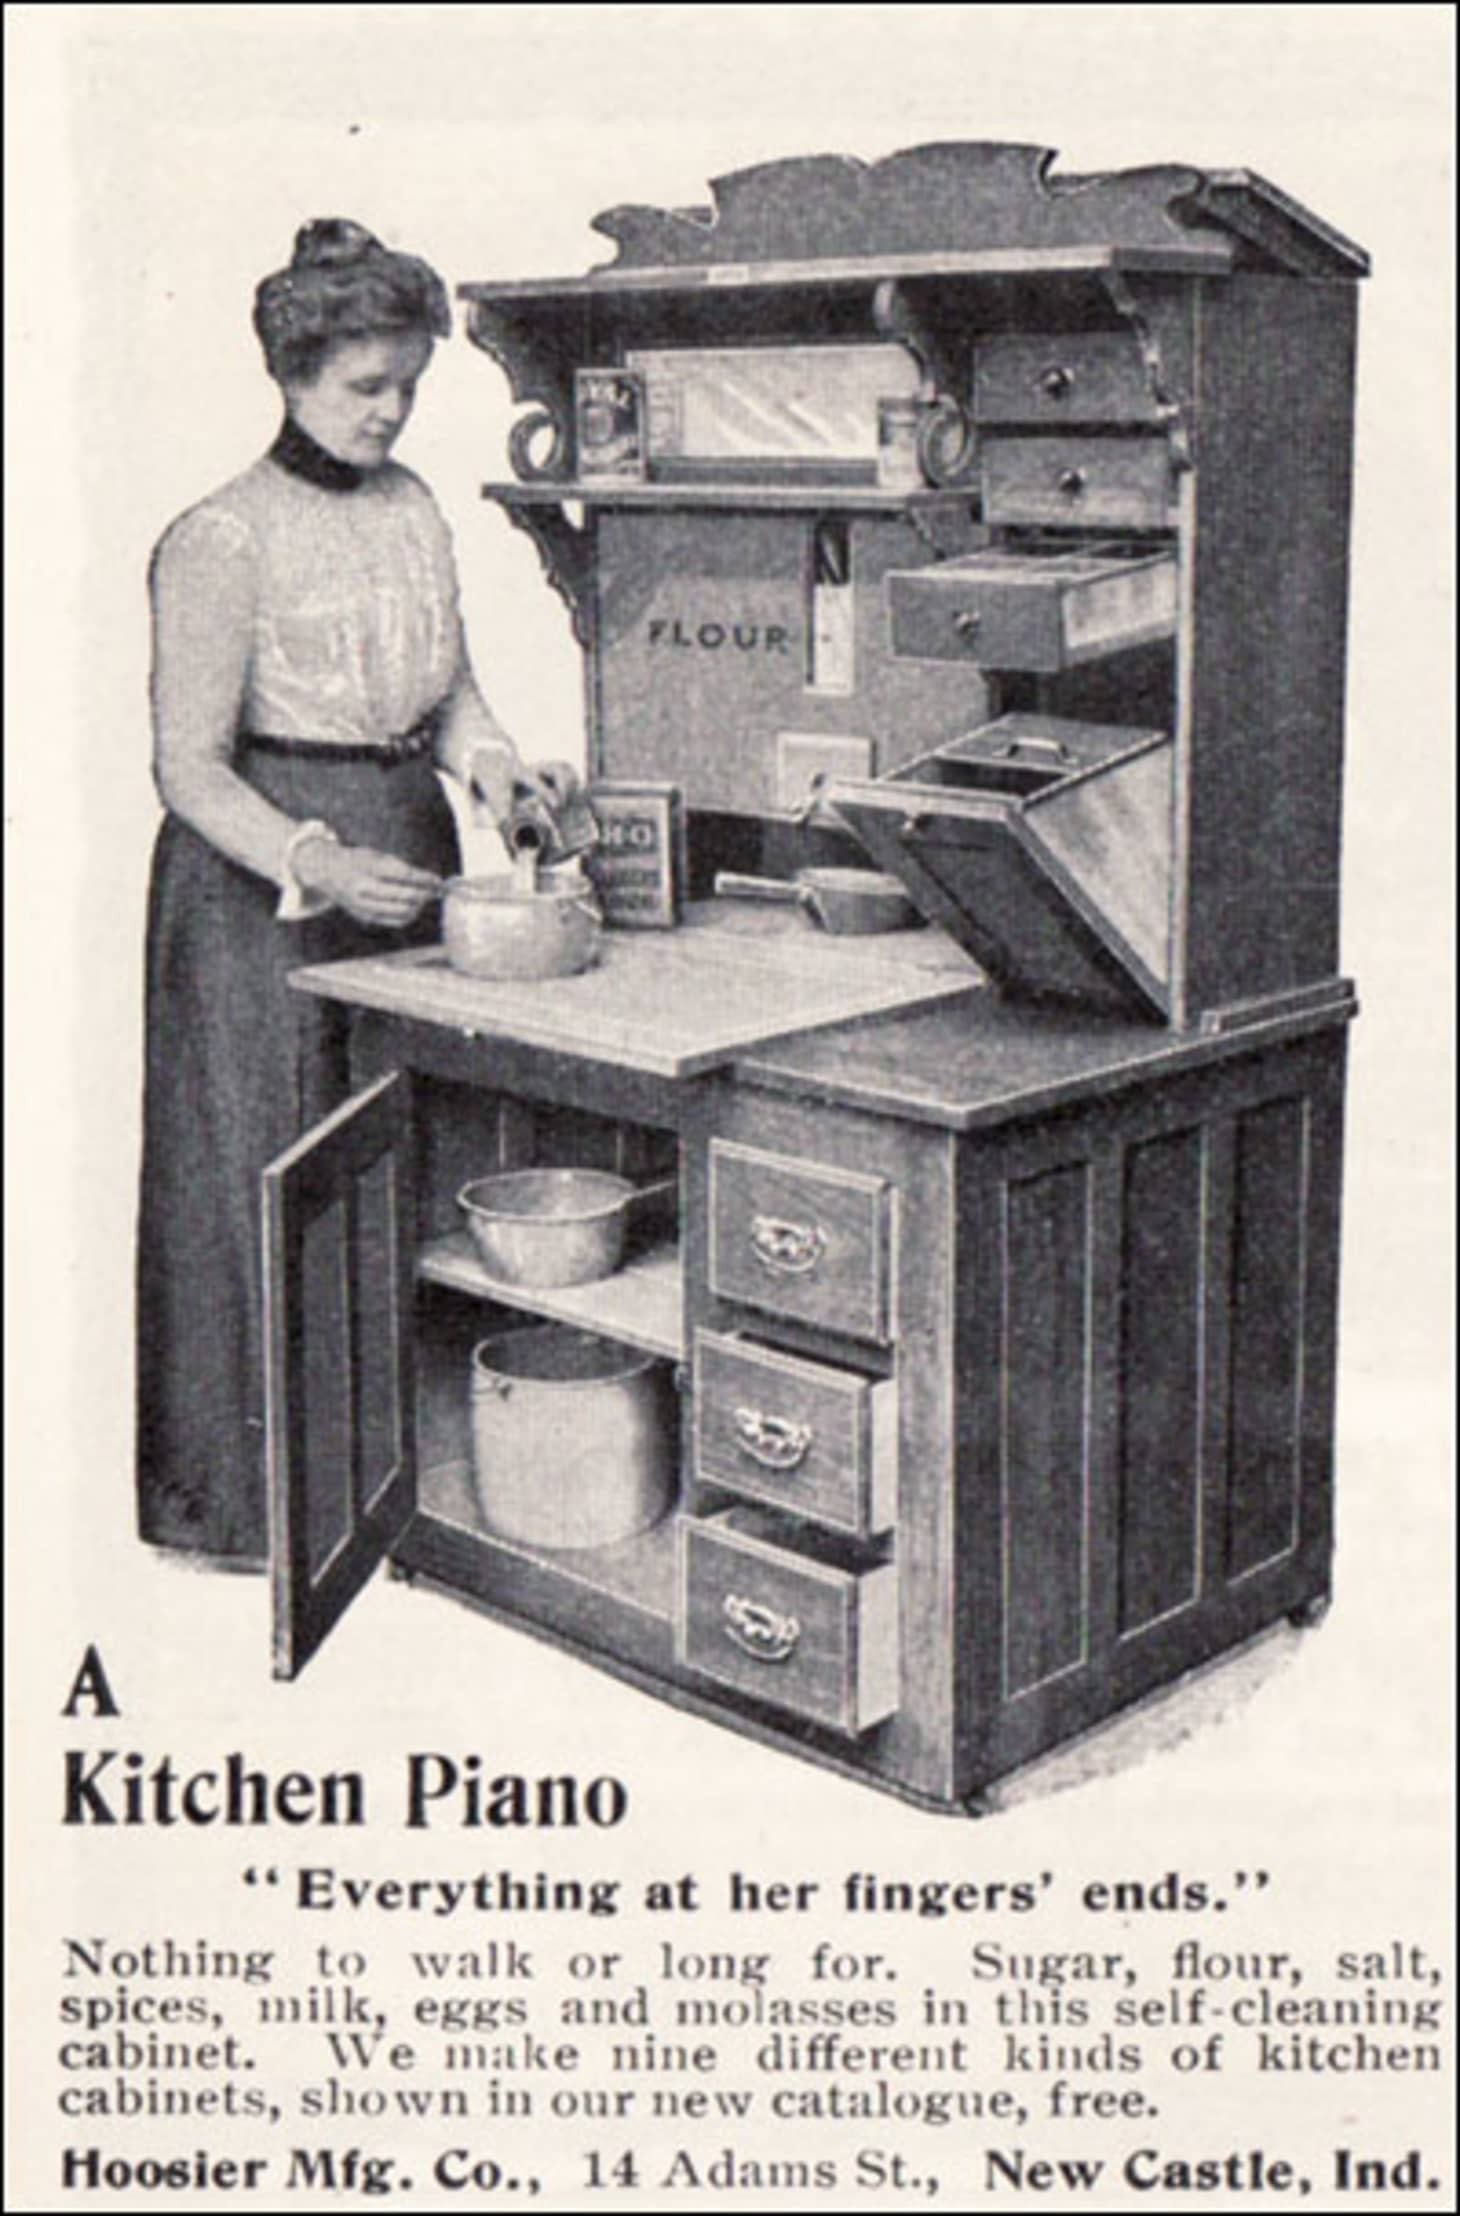 Kitchen Cabinet History
 A Brief History of Kitchen Design from 1900 to 1920